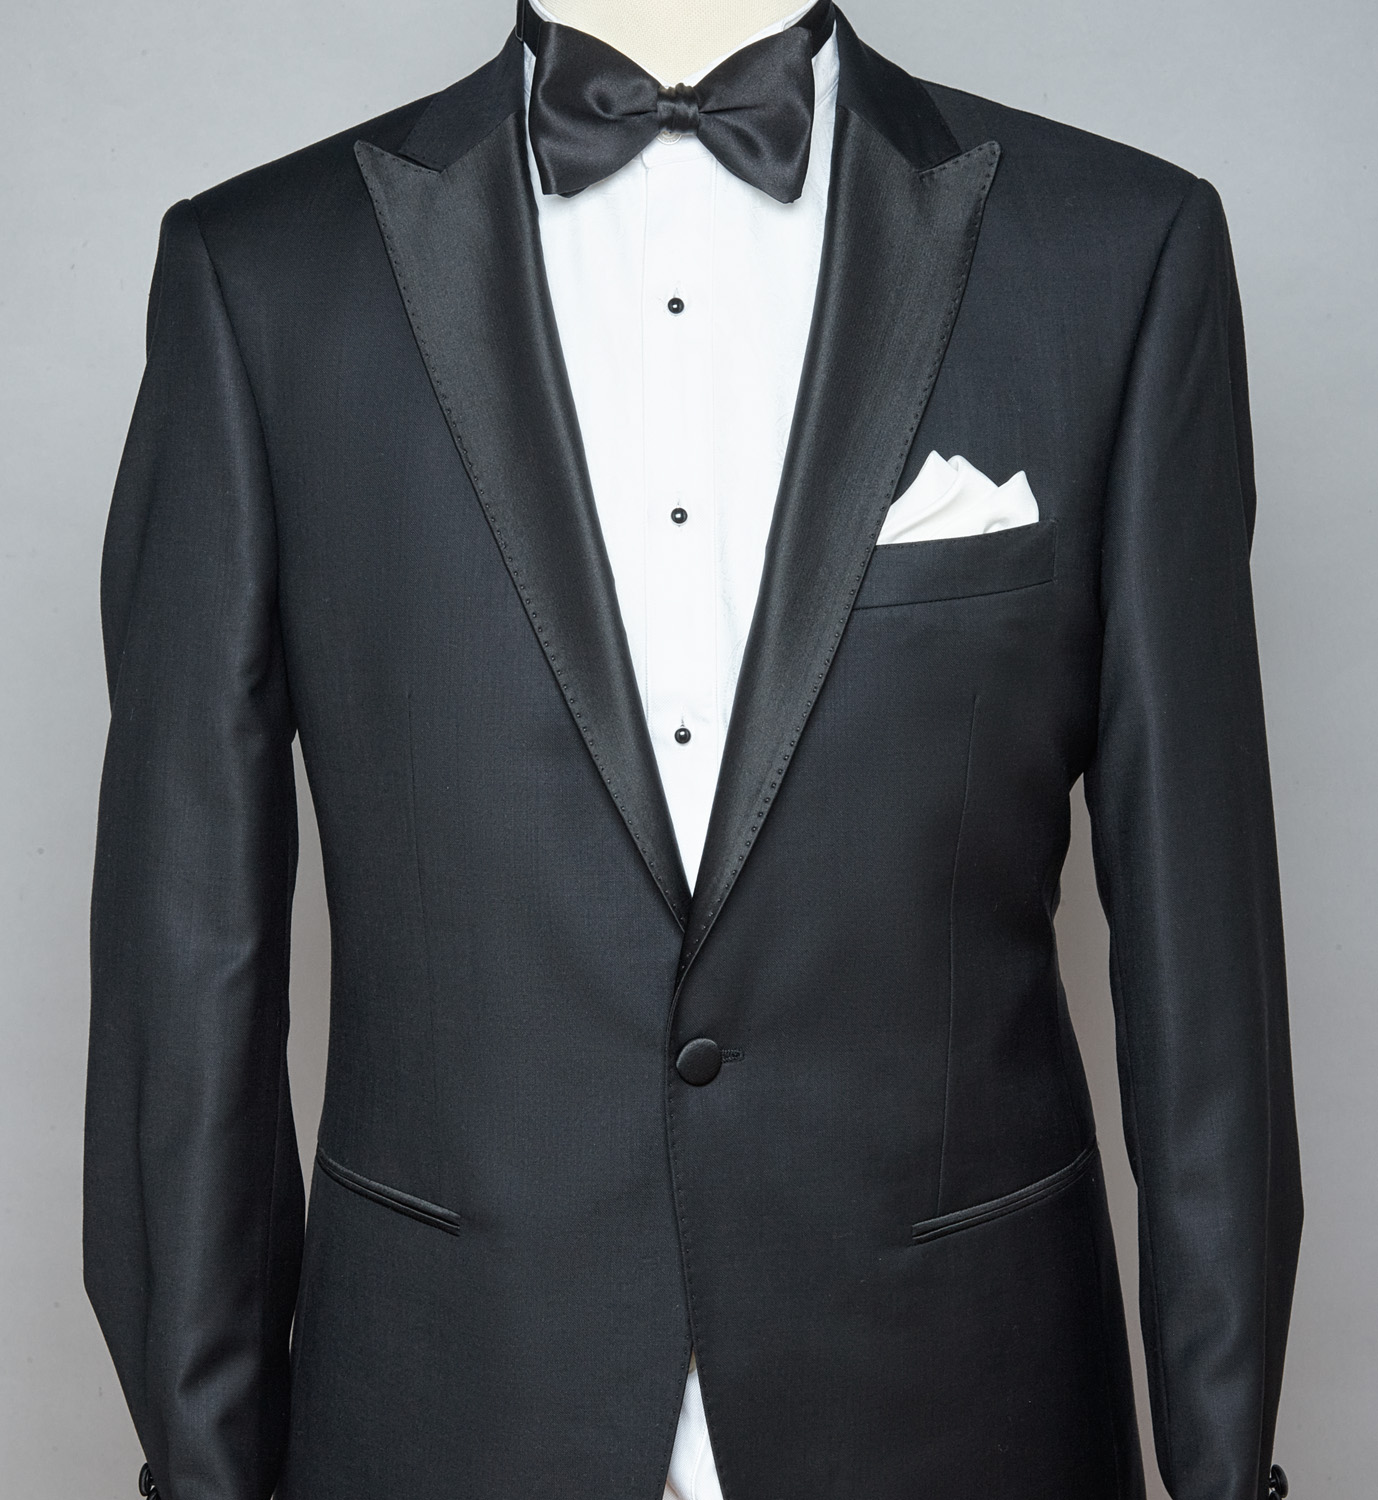 New Arrivals: Tuxedo's By Hilton, Lab, Van Gils and Tiger of Sweden ...